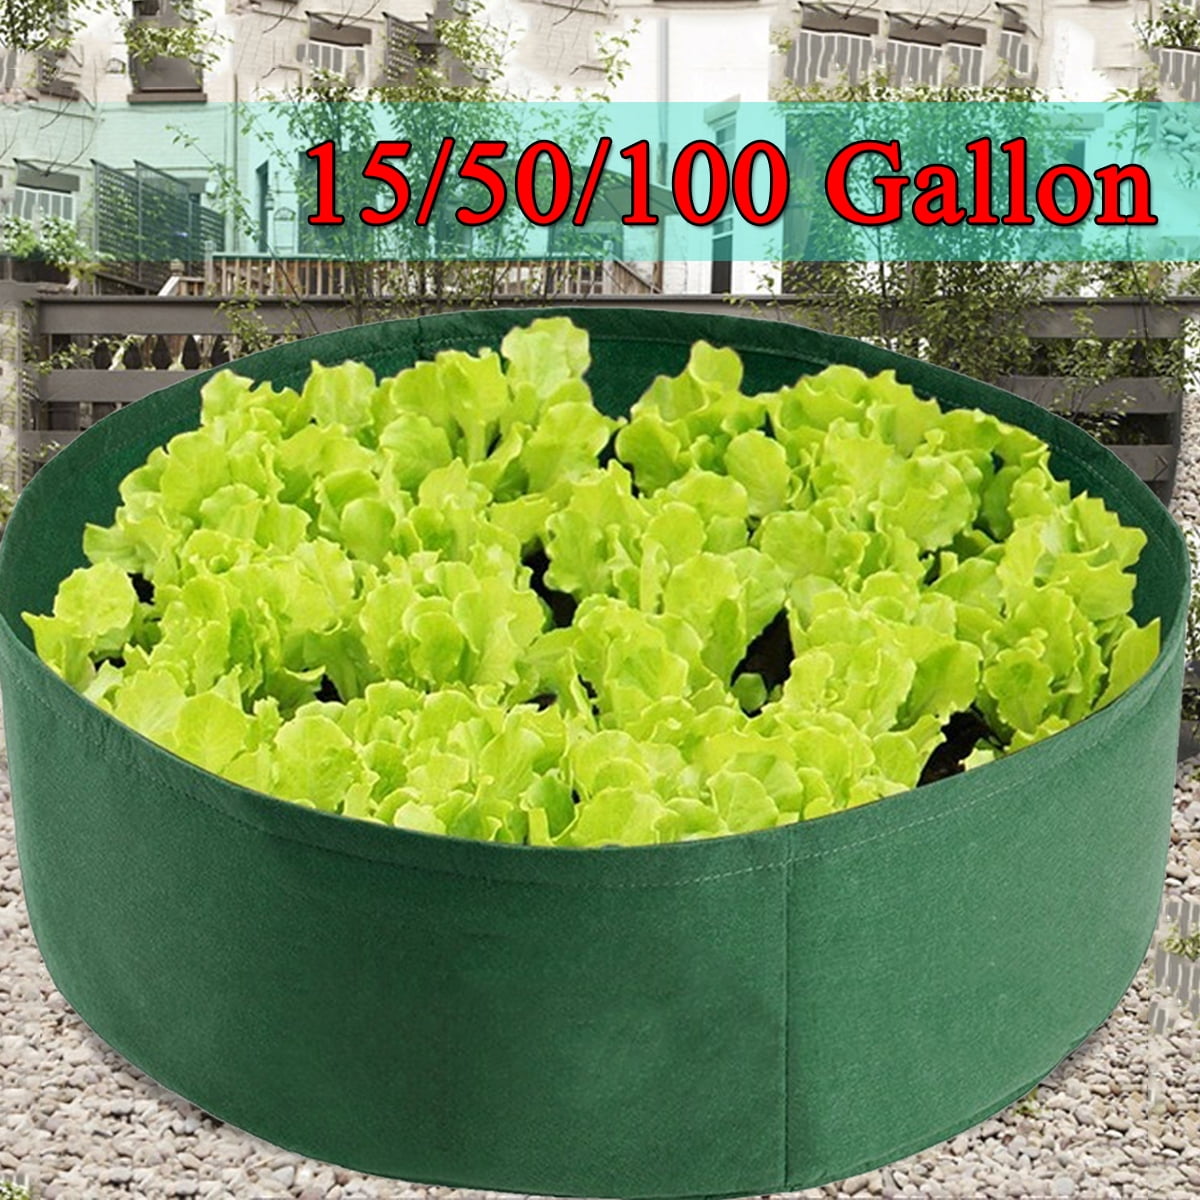 Flowers & Vegetables 135-Gallon Smart Planting Container Grow Bag Planter Pot for Plants Kenley Fabric Raised Garden Bed with Plant Tags Set 